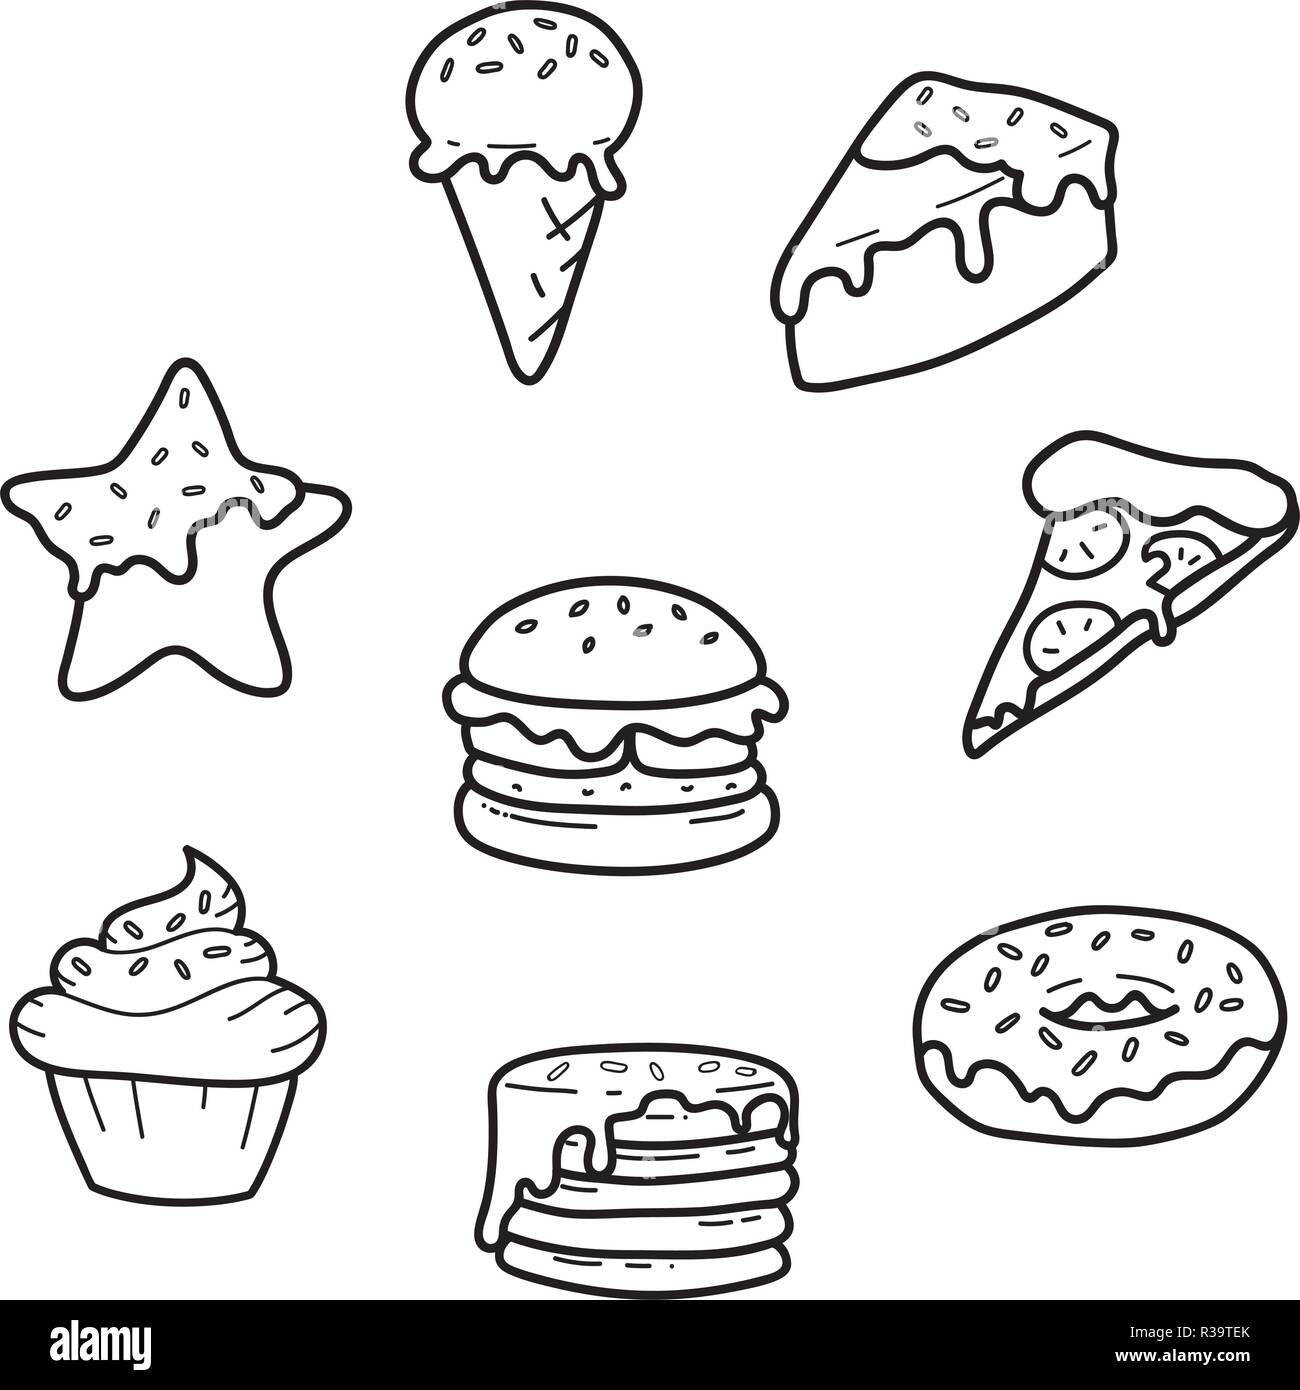 how to draw cute junk food I how to draw cute junk food easy - YouTube-saigonsouth.com.vn